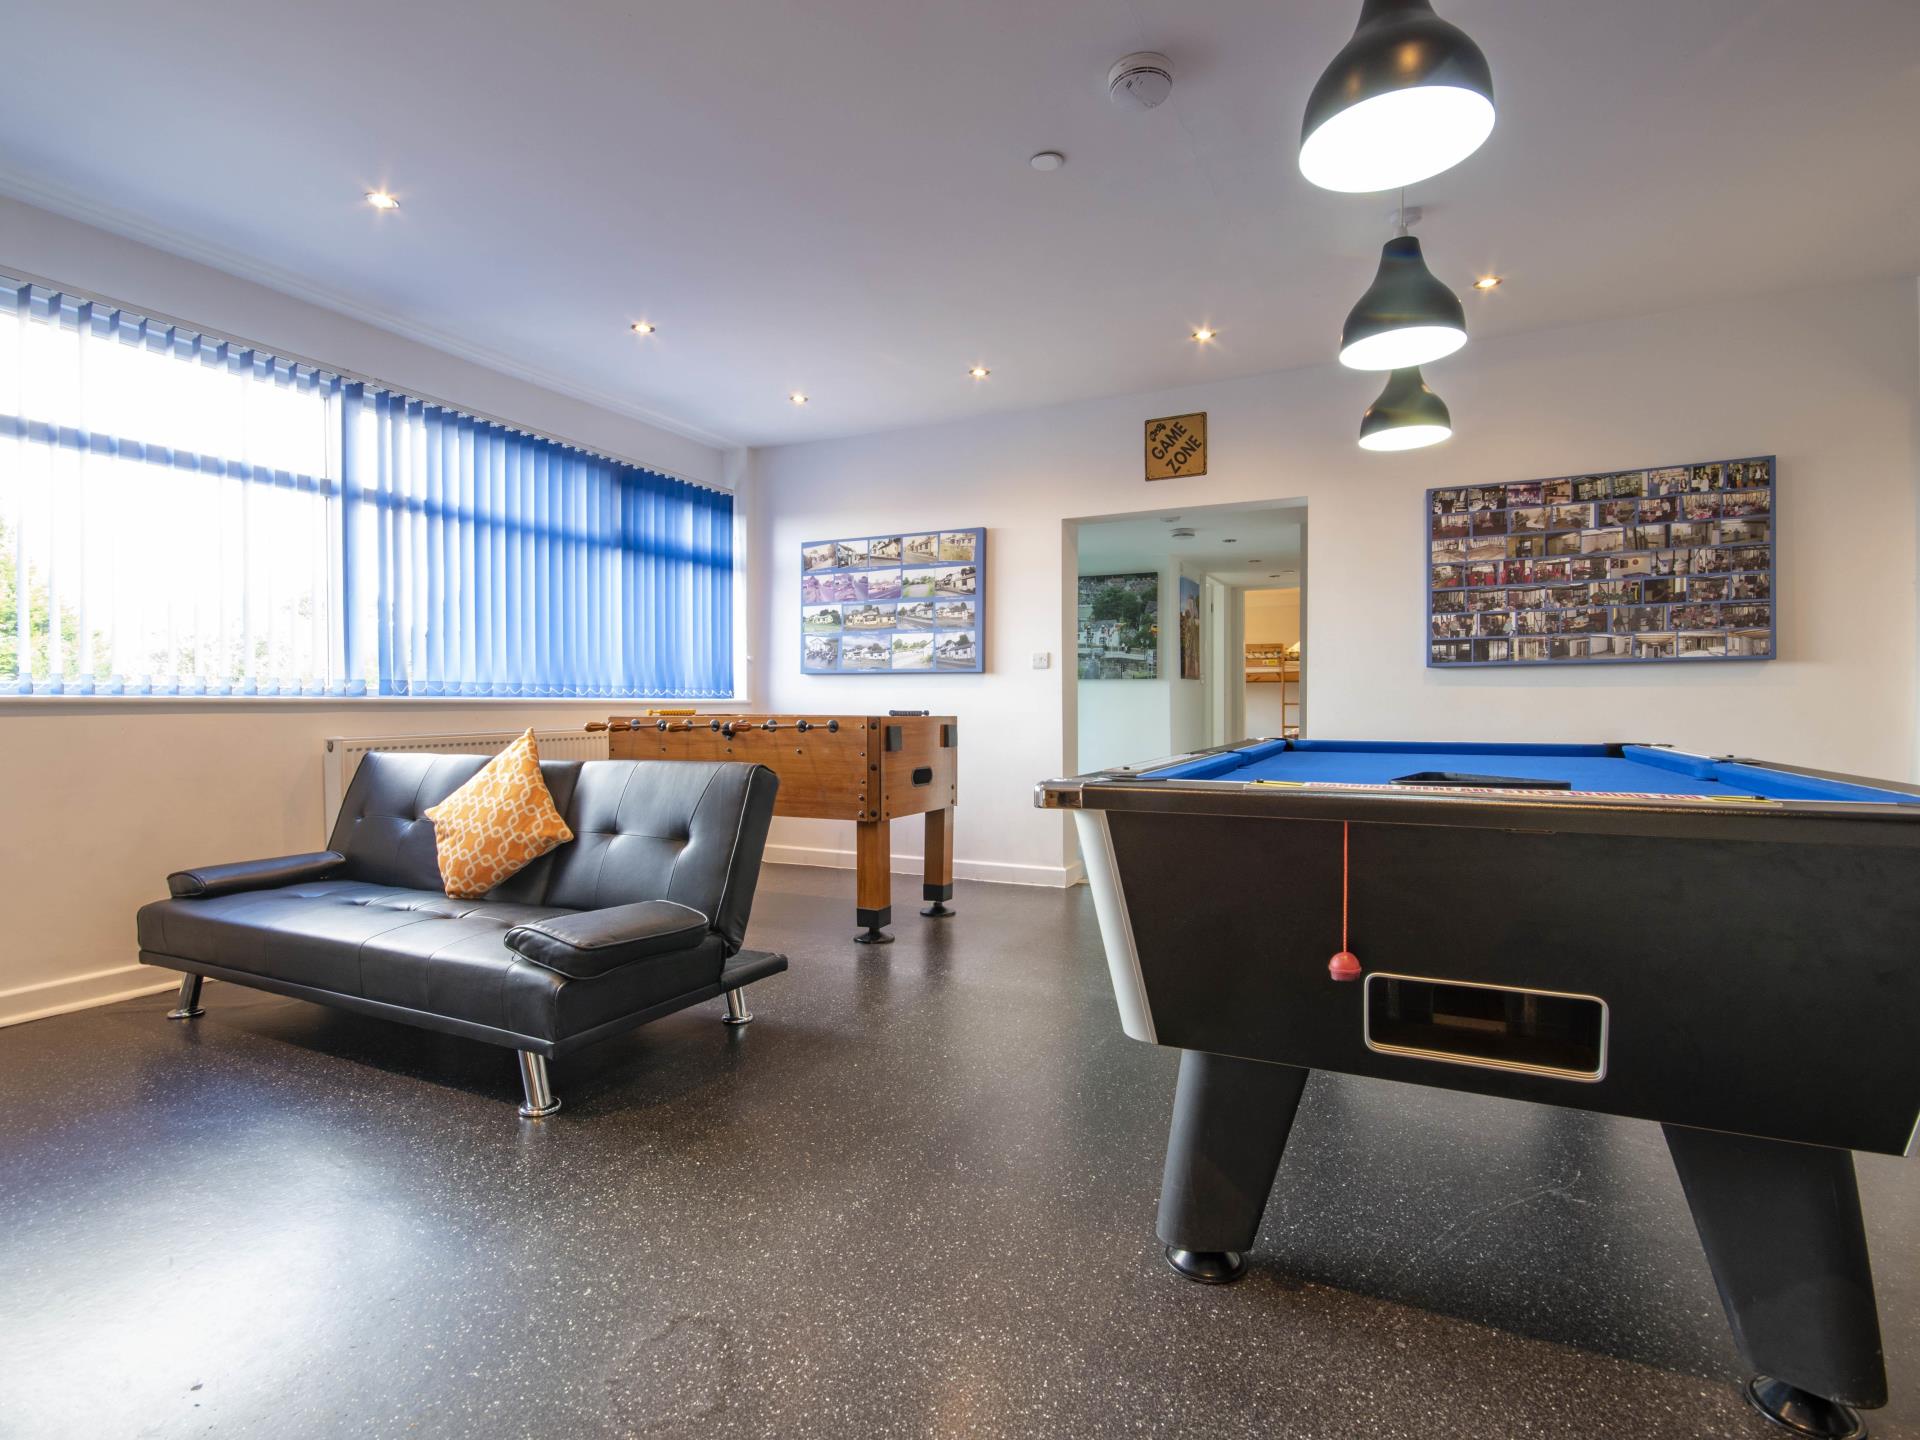 Welsh Row House games room. football Table.